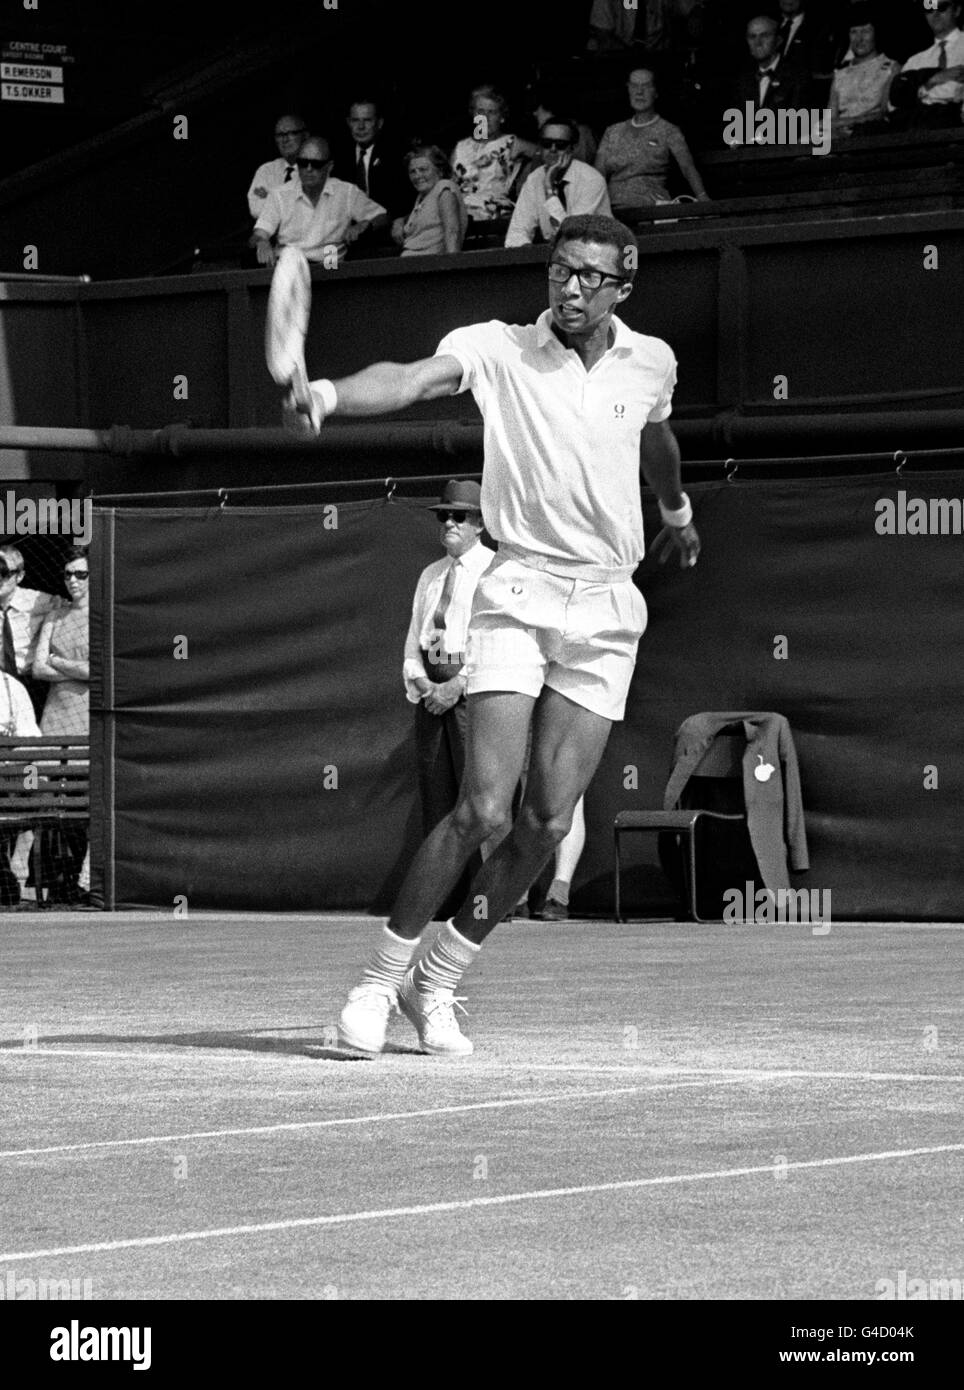 07/02/1993: Died on this day, American tennis player, Arthur Ashe, from complications arising from AIDS PA NEWS PHOTO 1/7/68 AMERICA'S ARTHUR ASHE IN ACTION DURING THE MEN'S SINGLES WIMBLEDON TENNIS CHAMPIONSHIP Stock Photo